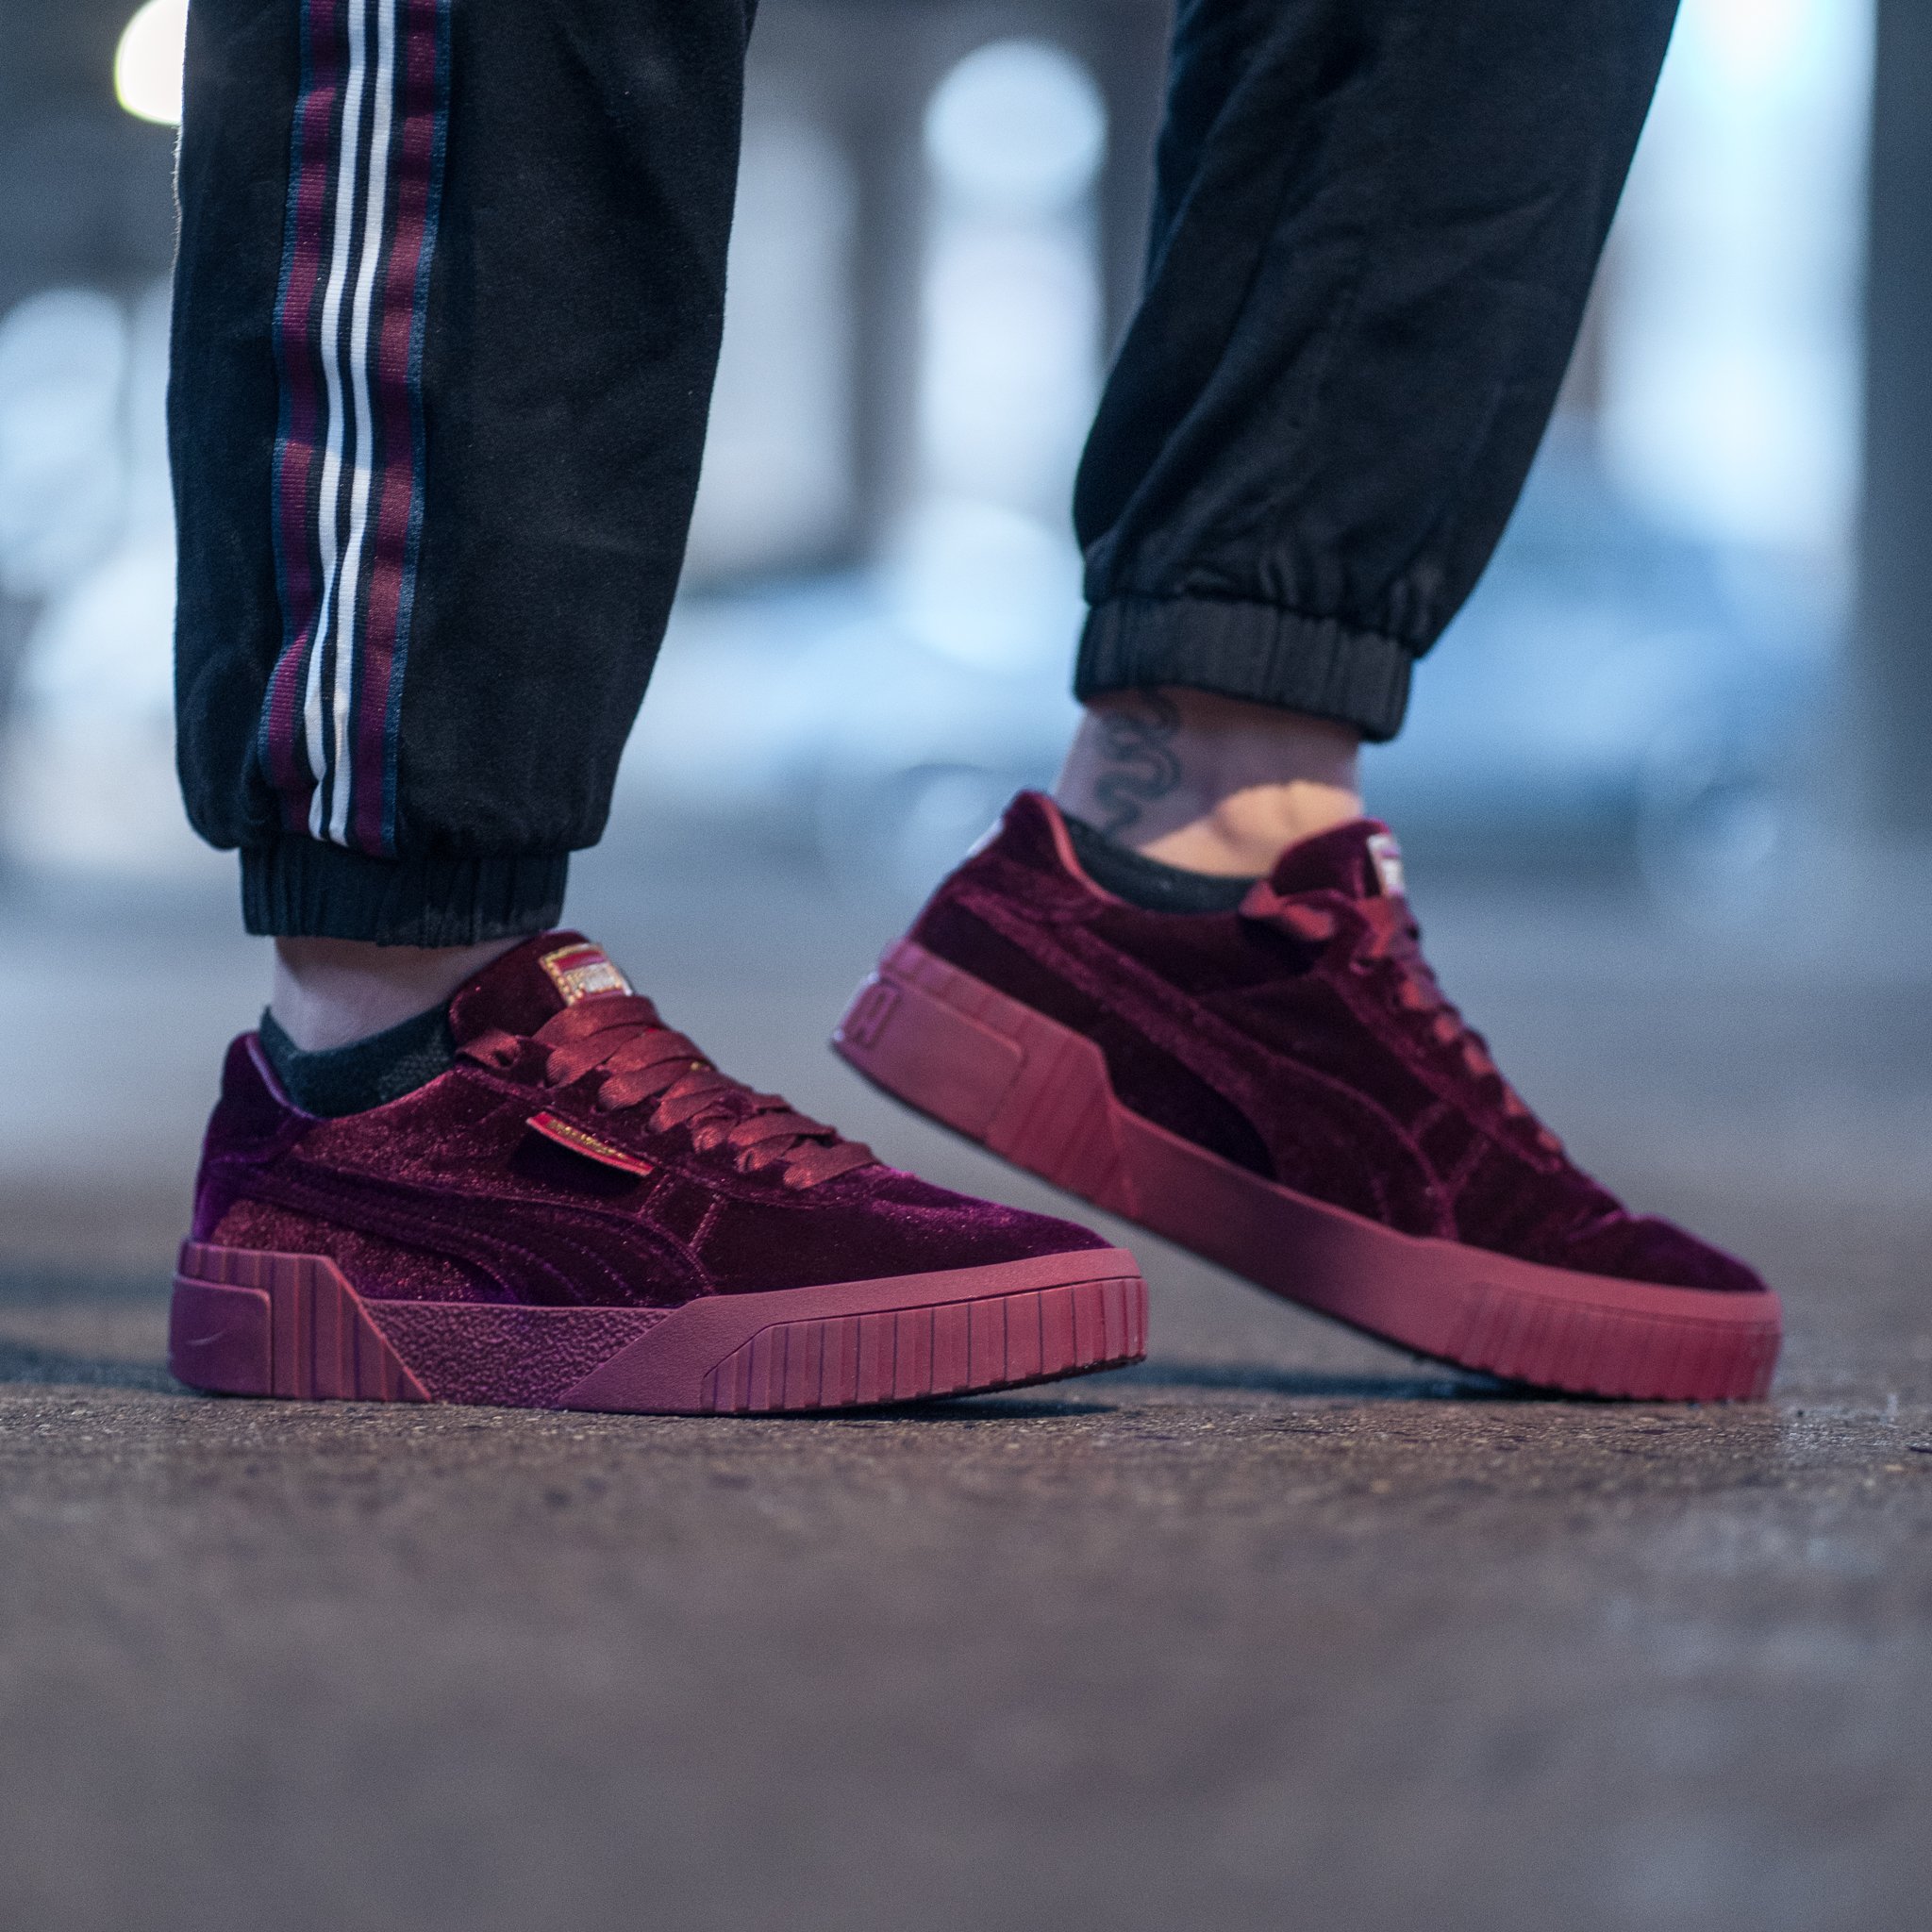 GB'S Sneaker Shop on Twitter: "Puma Cali Velvet Women's (6-10) $80 369887-01 #puma #gbny #pumacalivelvet —————————————— 24/7 Customer Service 📞 Call/Text to Order: 1-877-SHOP-GB'S (1-877-746-7427) 📧Email Orders: https://t.co/H0SO4zhKMj ...